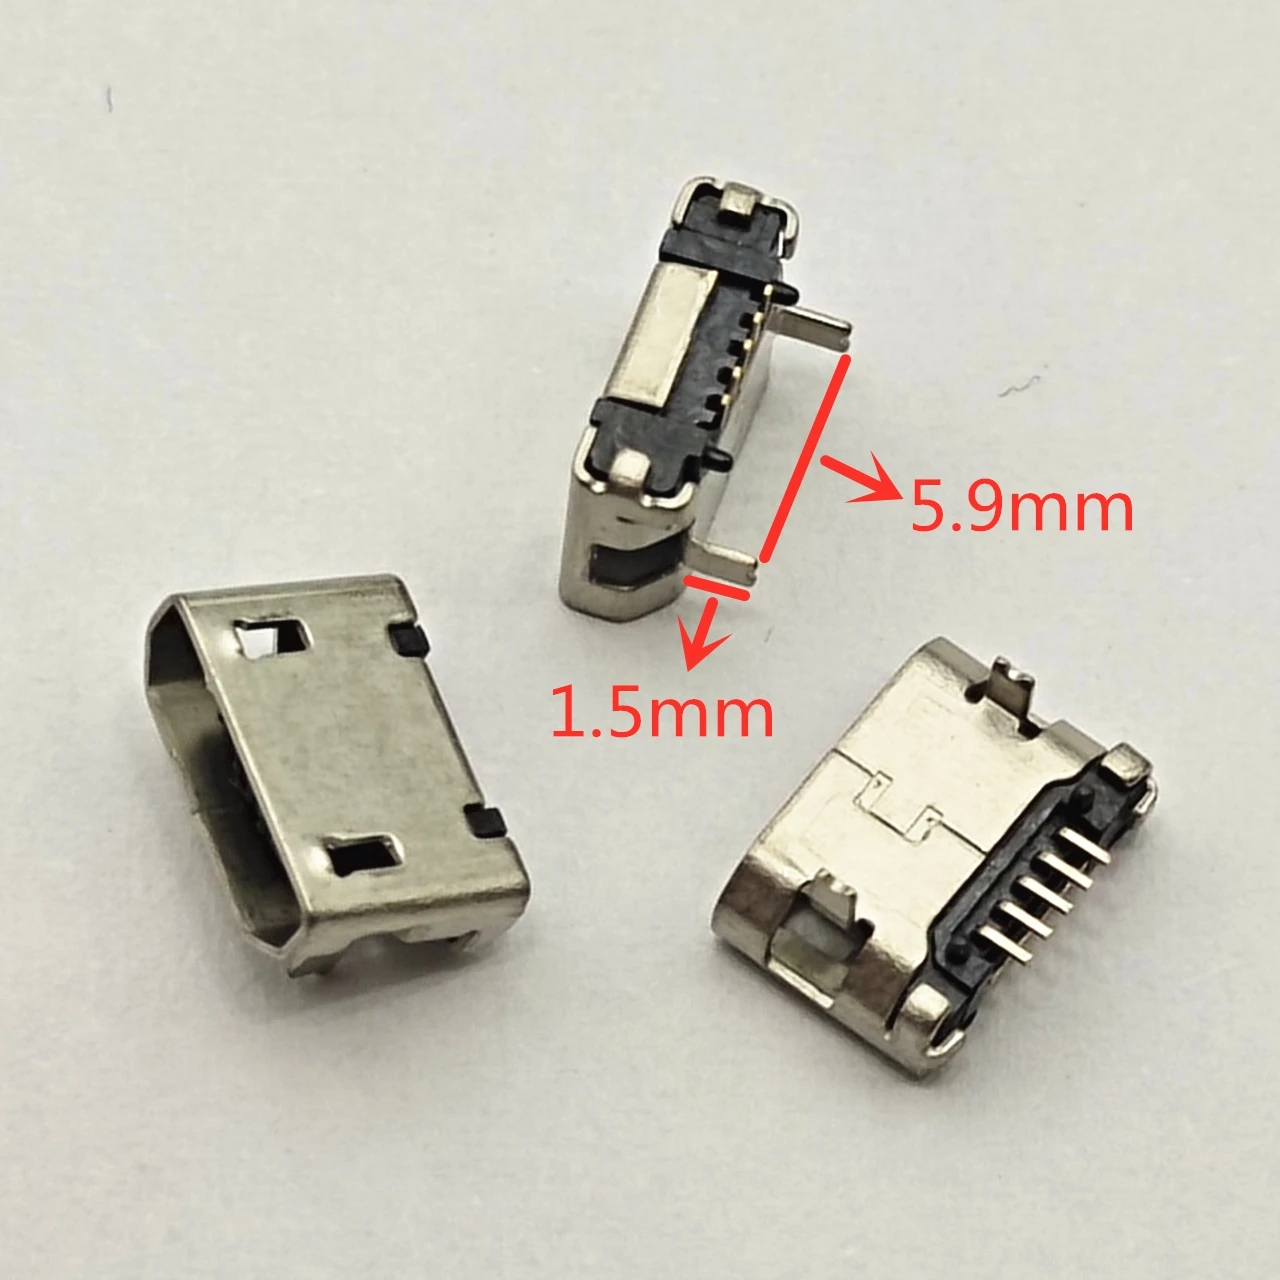 50pcs Micro USB Connector 5pin DIP2 Long leg 1.5mm No side Flat mouth Short needle for Mobile phone Tail Data plug Charging port